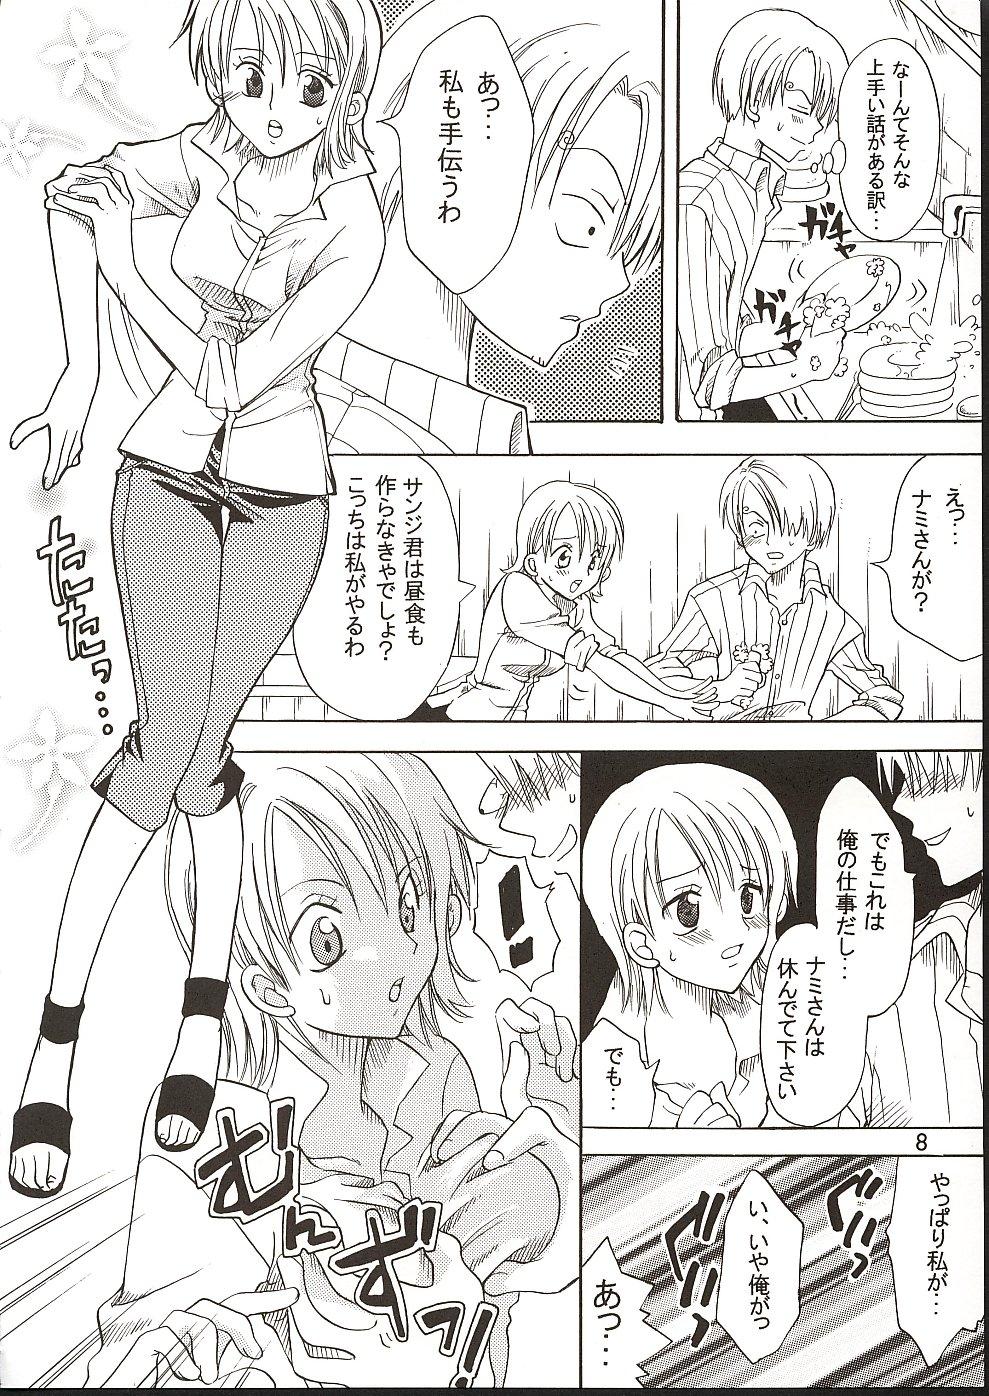 Uncensored Shiawase Punch! 3 - One piece Rough - Page 7